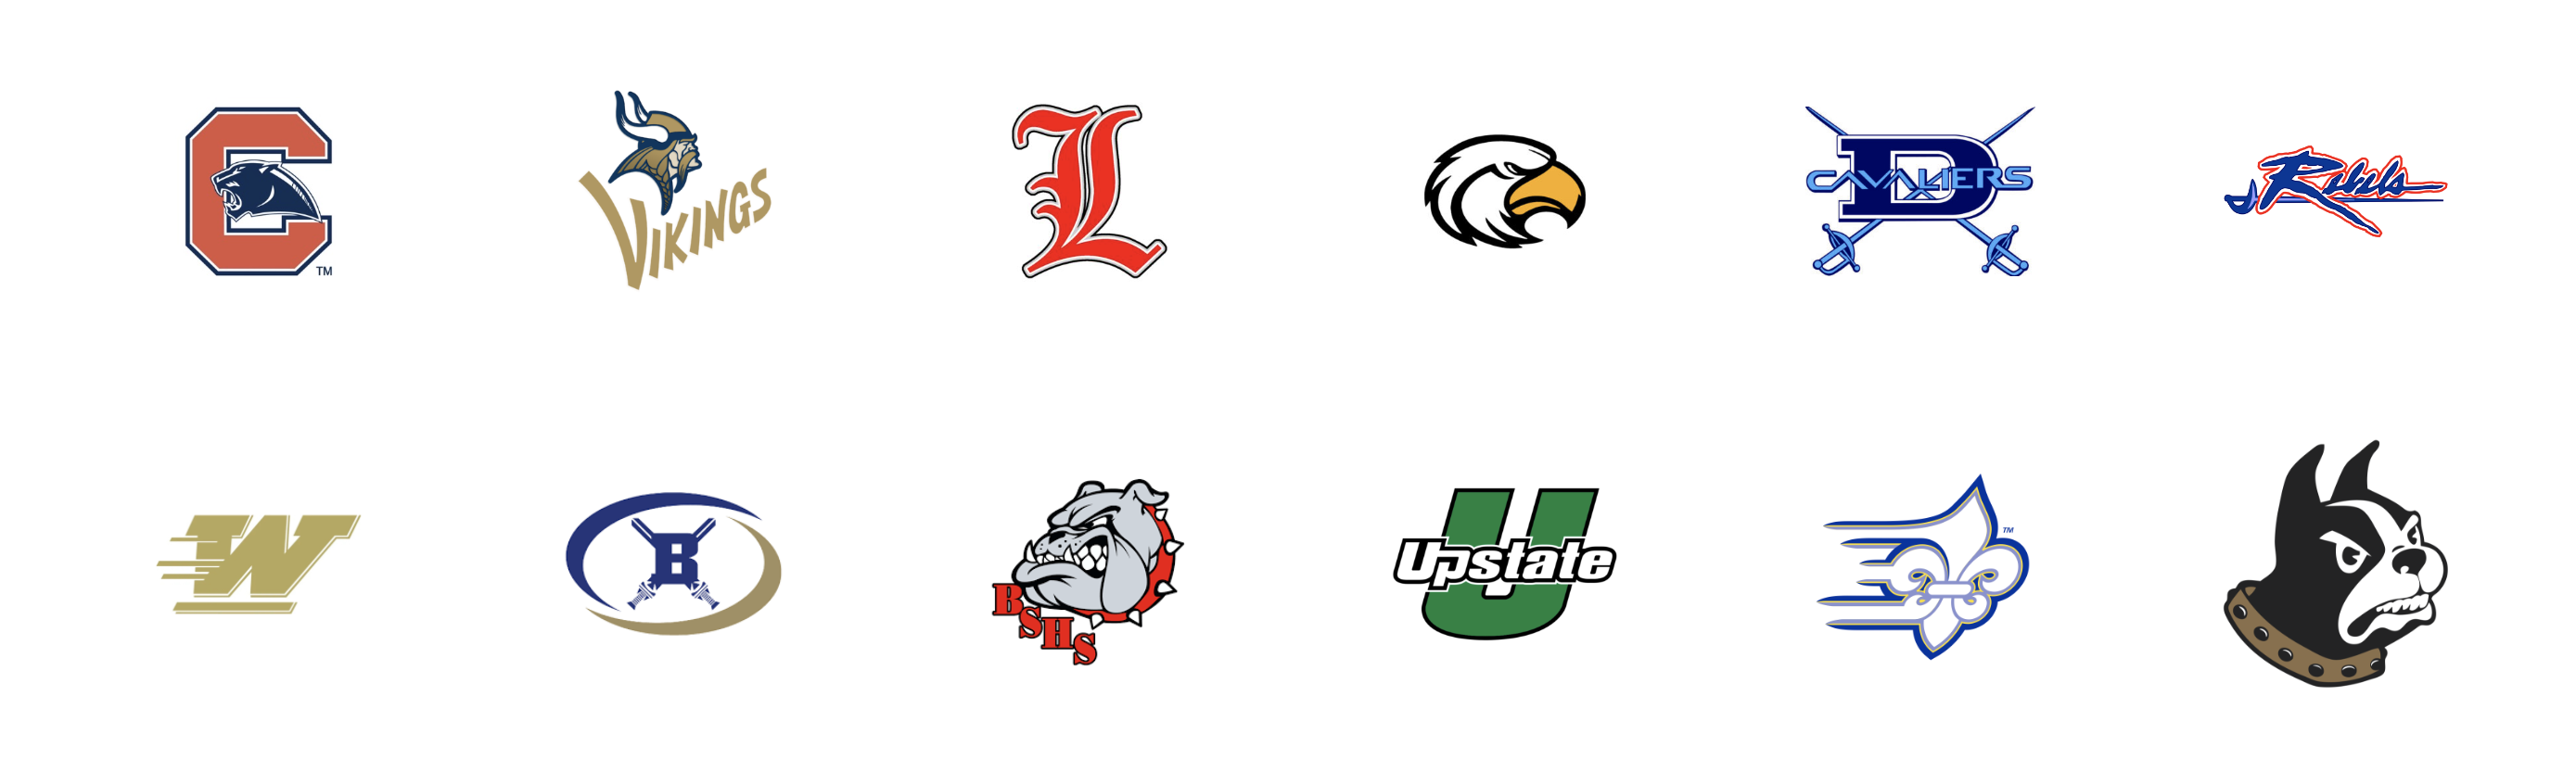 Spartan Waste is an active athletic booster for the following high schools: Boiling Springs, Broome, Byrnes, Chapman, Chesnee, Dorman, Landrum, Spartanburg and Woodruff. Additionally, we support USC Upstate and Limestone University.